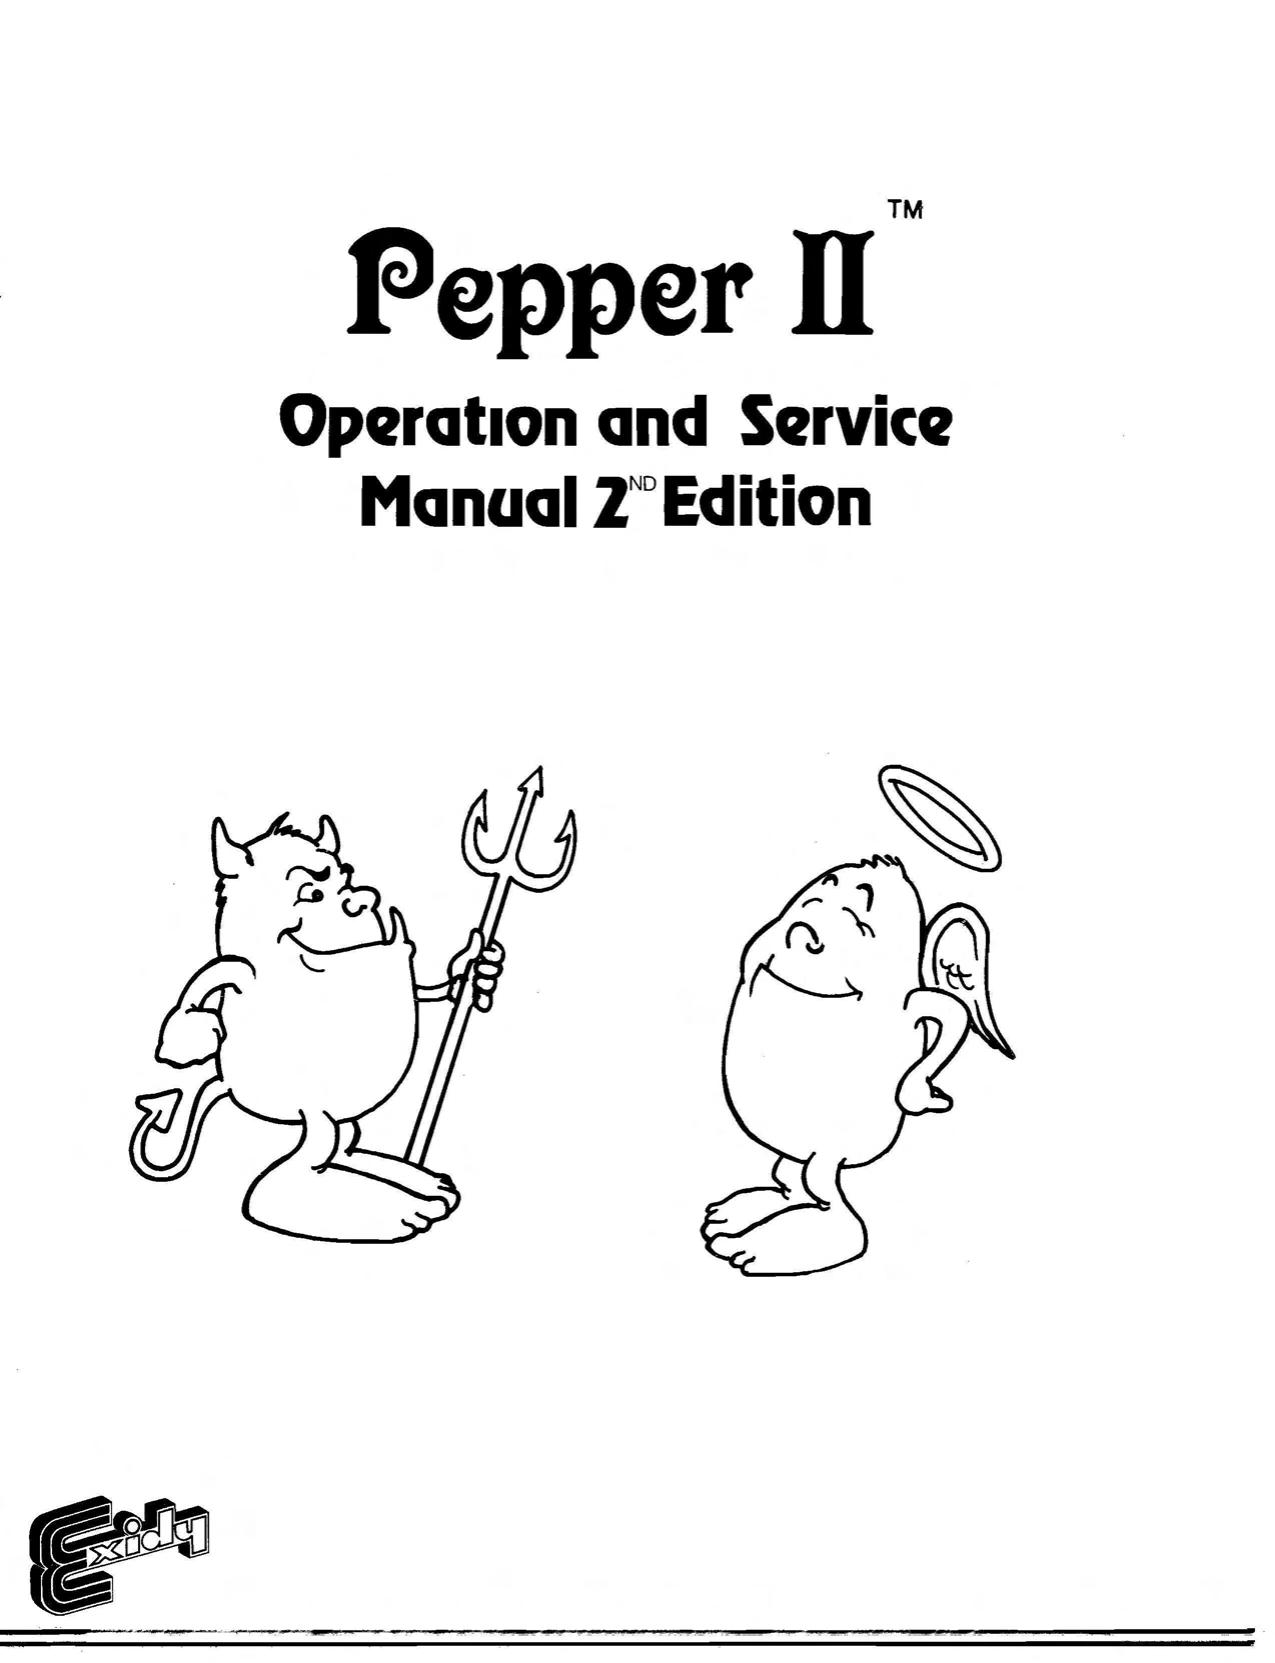 Pepper II Operation and Service Manual 2nd Edition